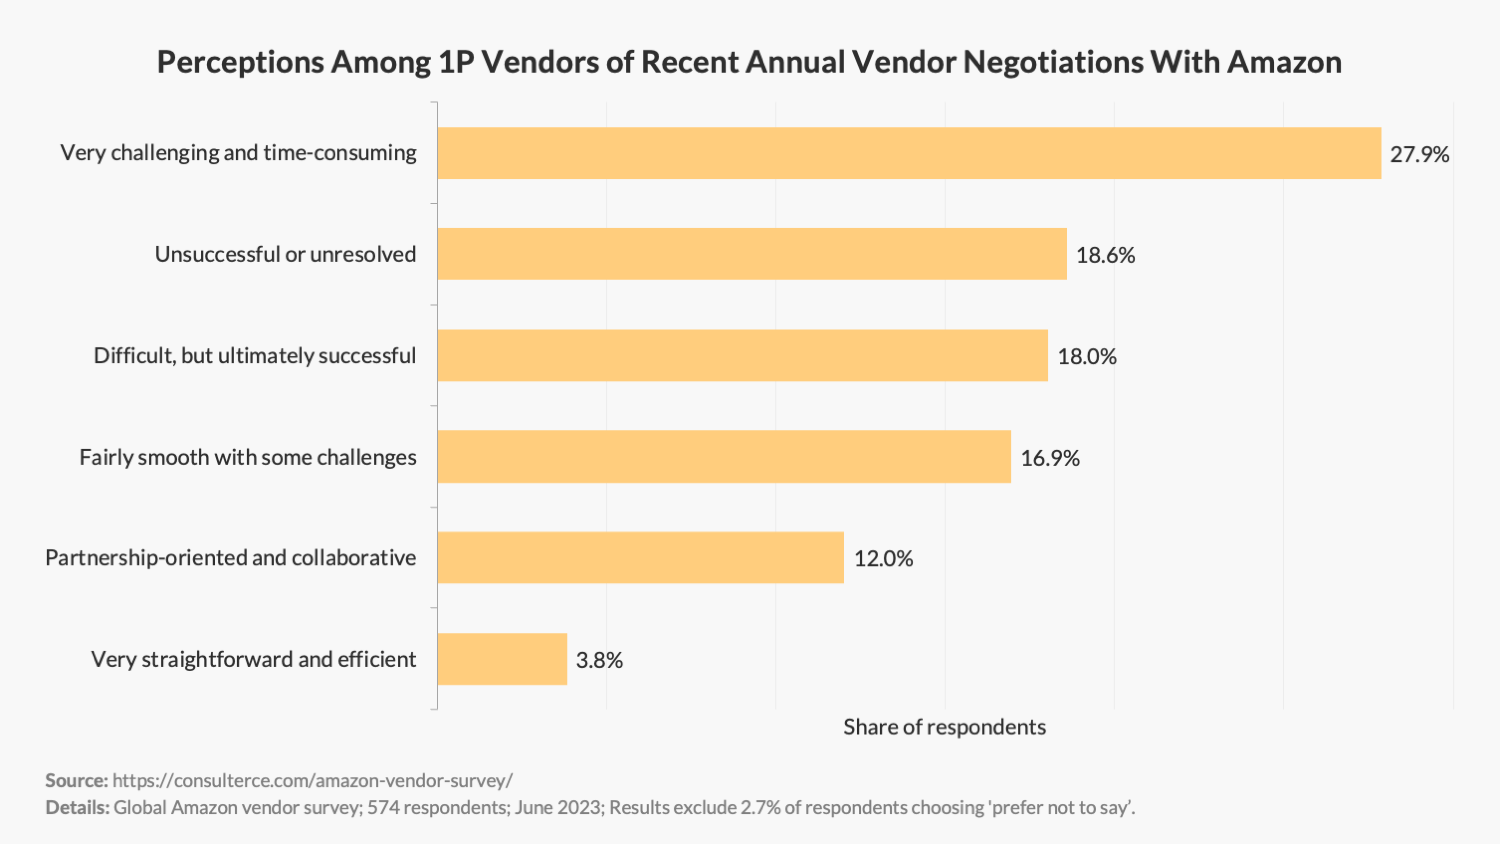 Perceptions Among 1P Vendors of Recent Annual Vendor Negotiations With Amazon